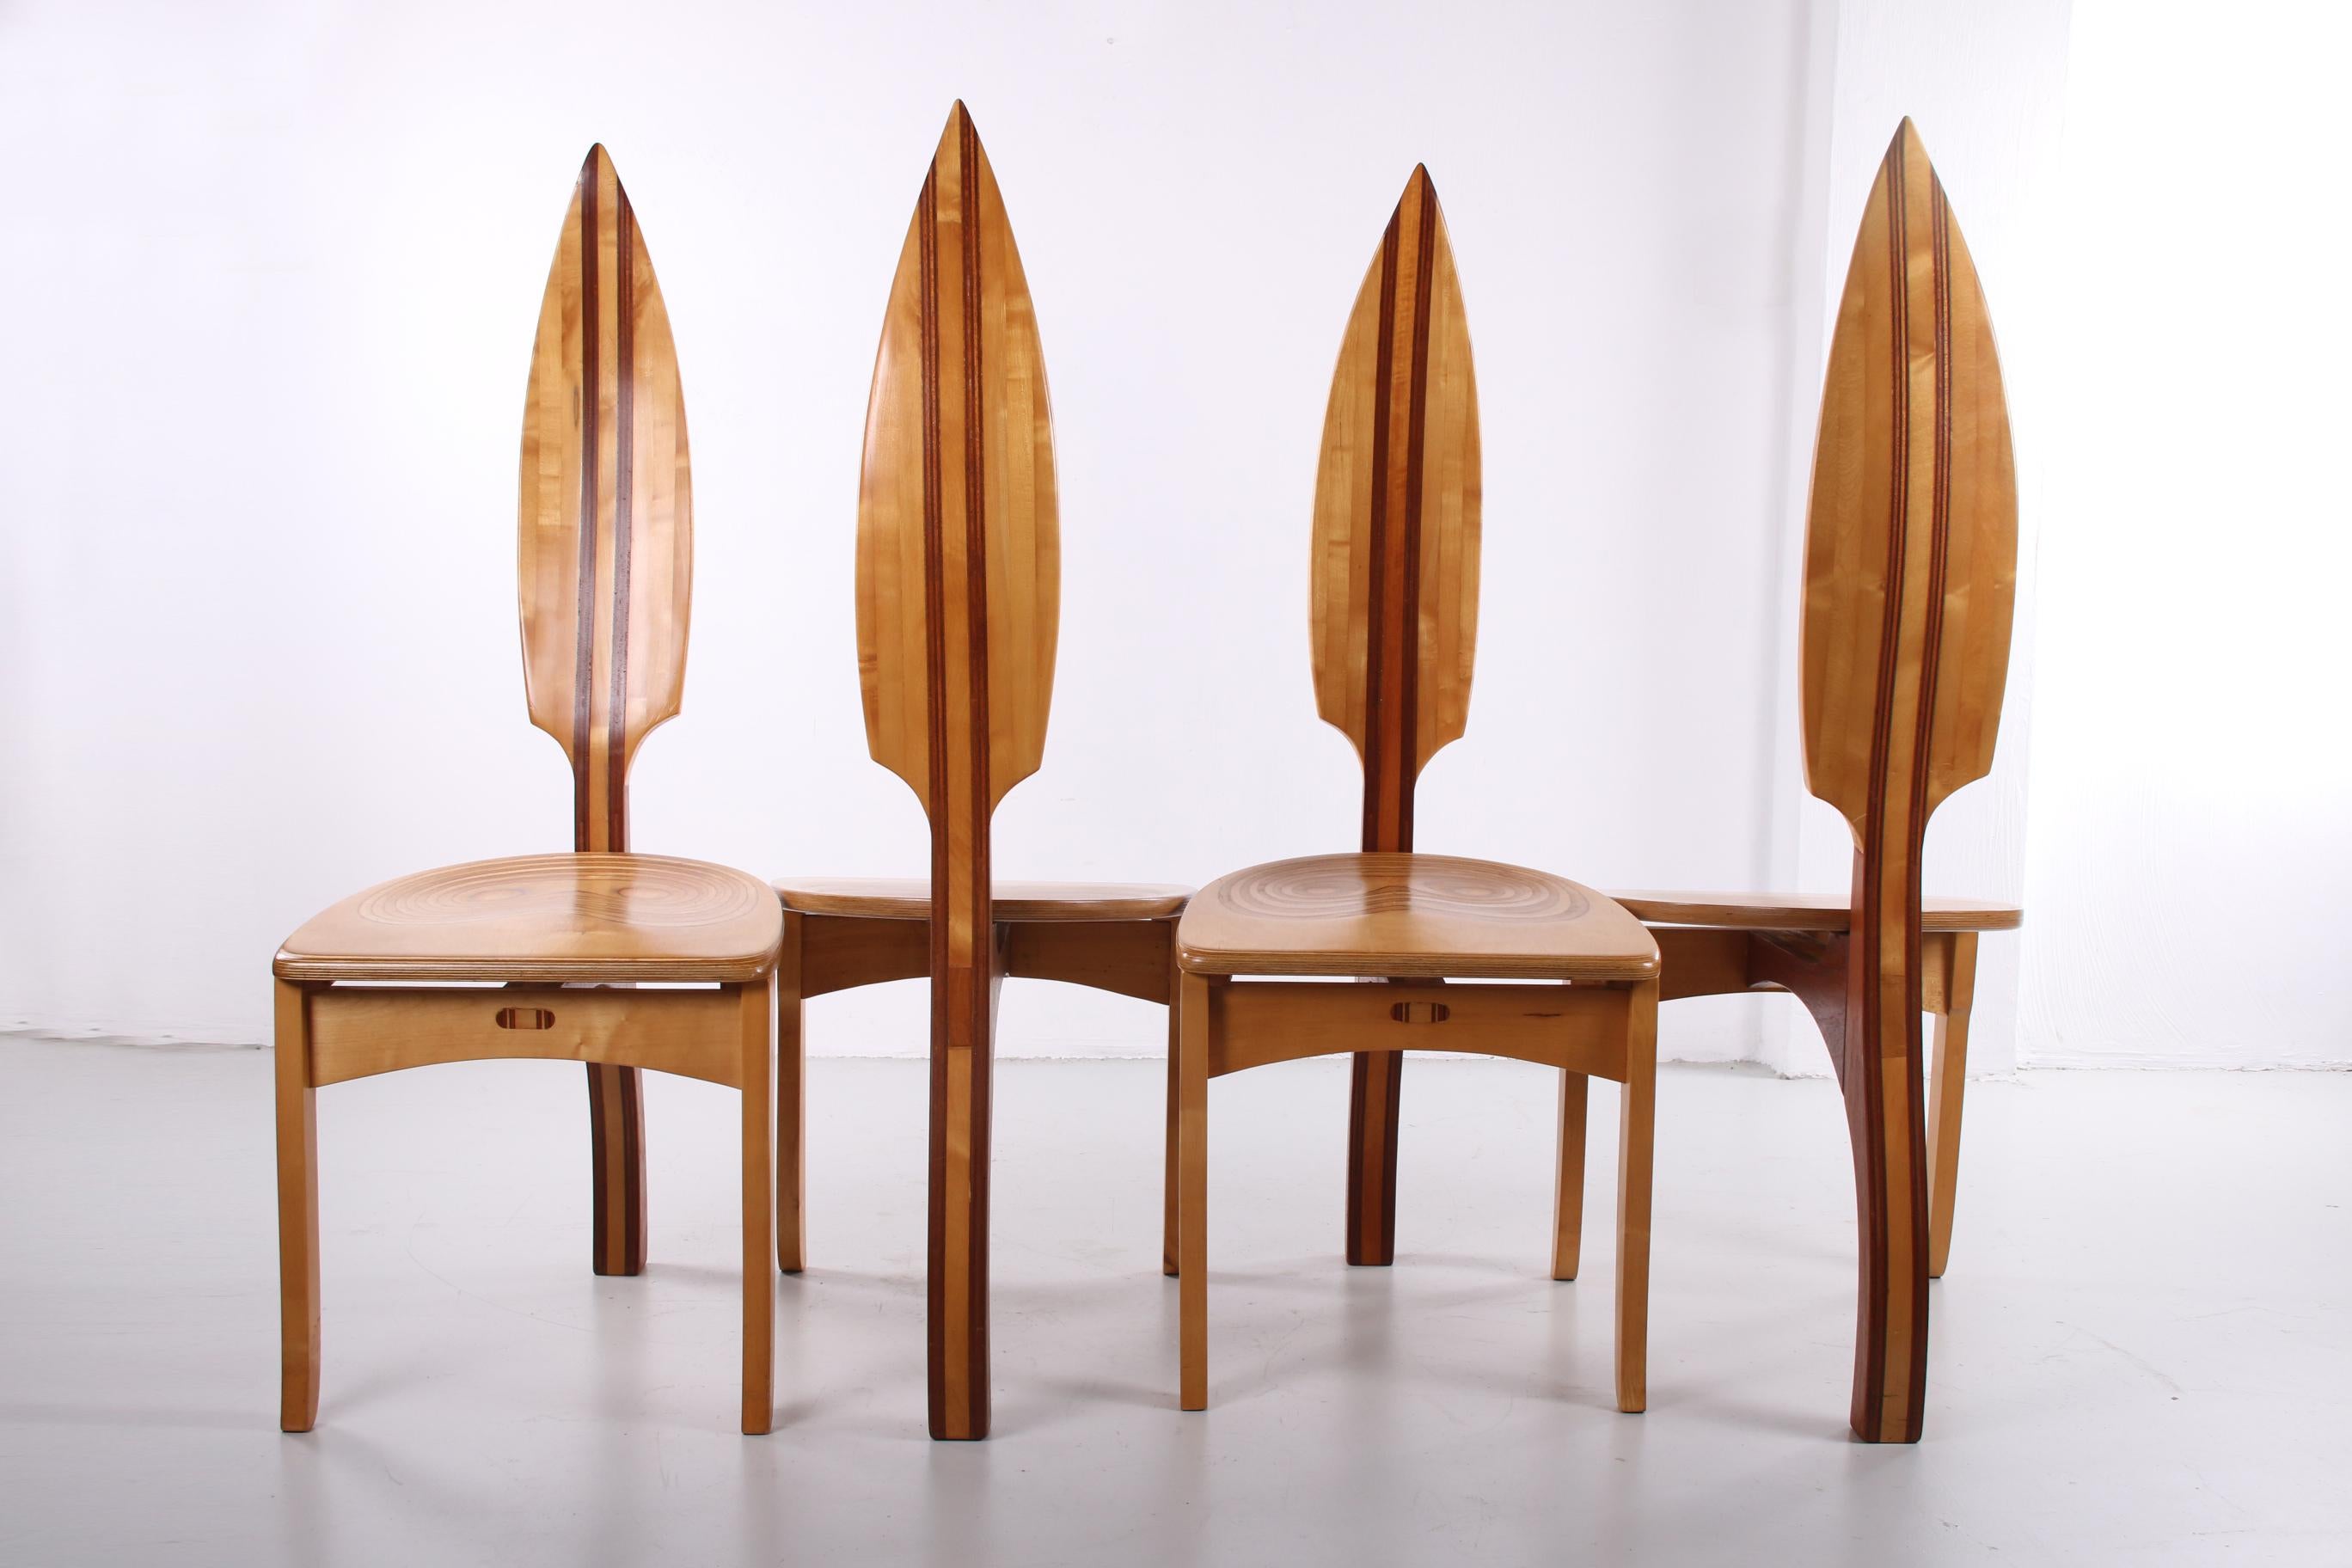 Brazilian Set of 4 David Haig Dining Table Chairs Made of Beech Wood Model Vedder, 70s